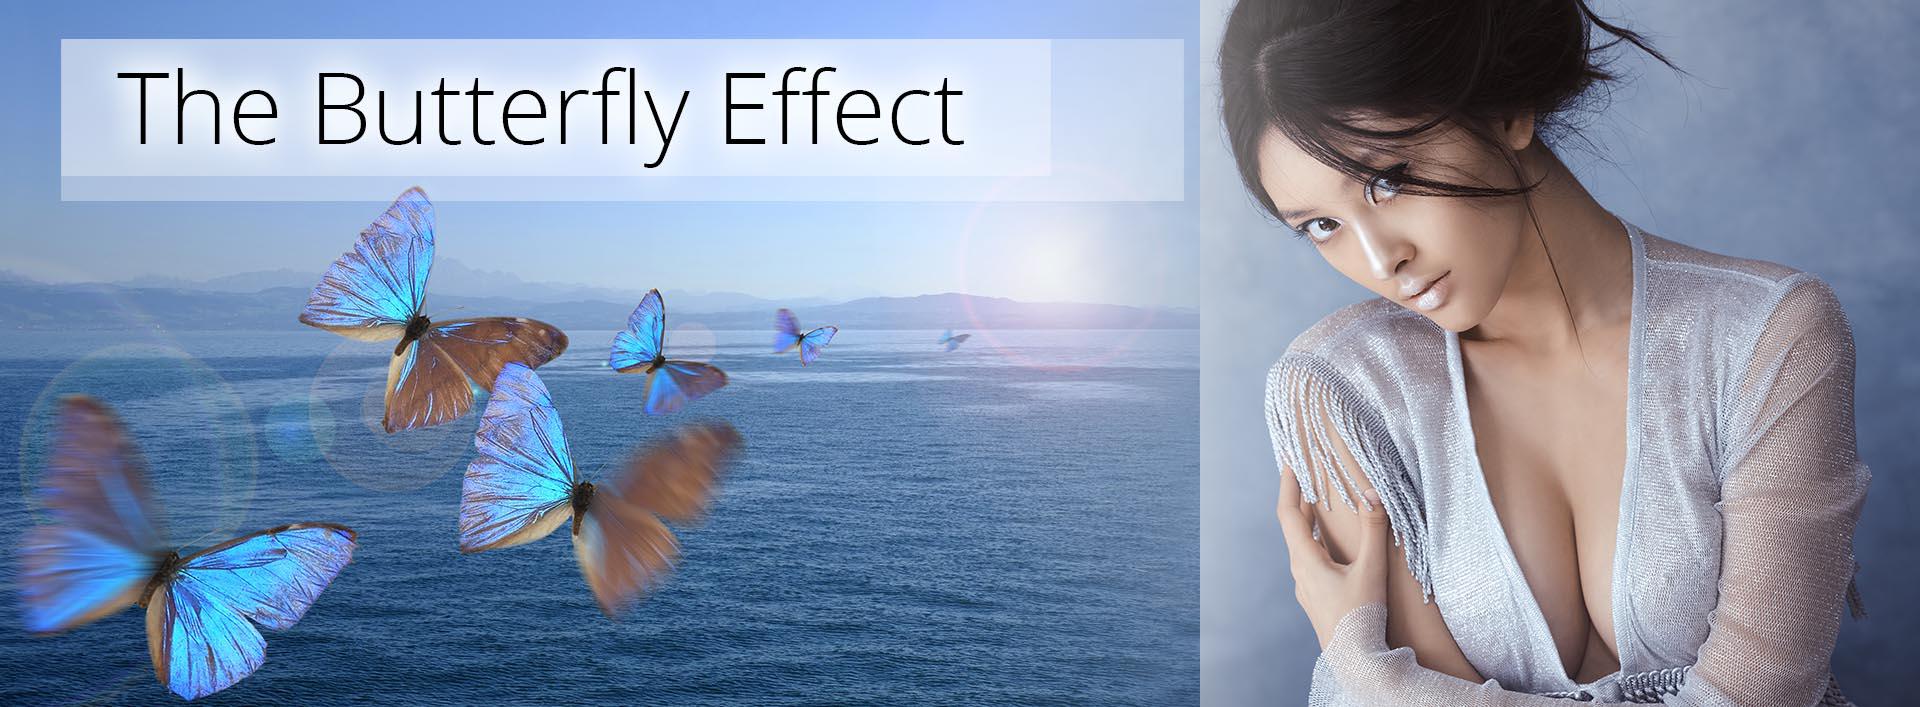 The Butterfly Effect - Part 2.2